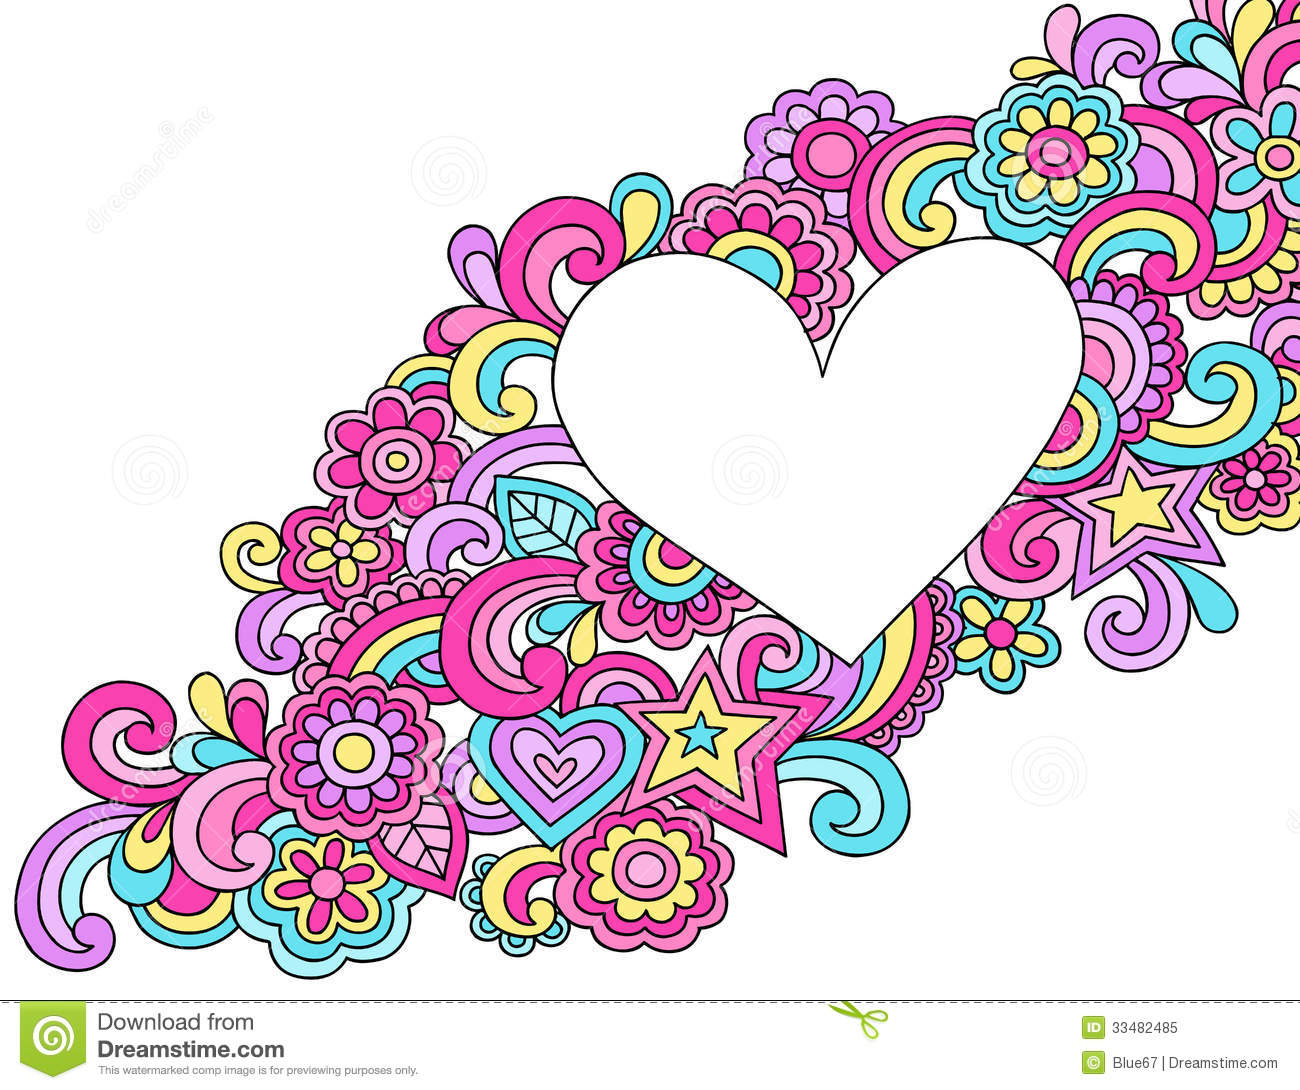 Psychedelic Heart Frame Doodle Vector Royalty Free Stock Photo   Image